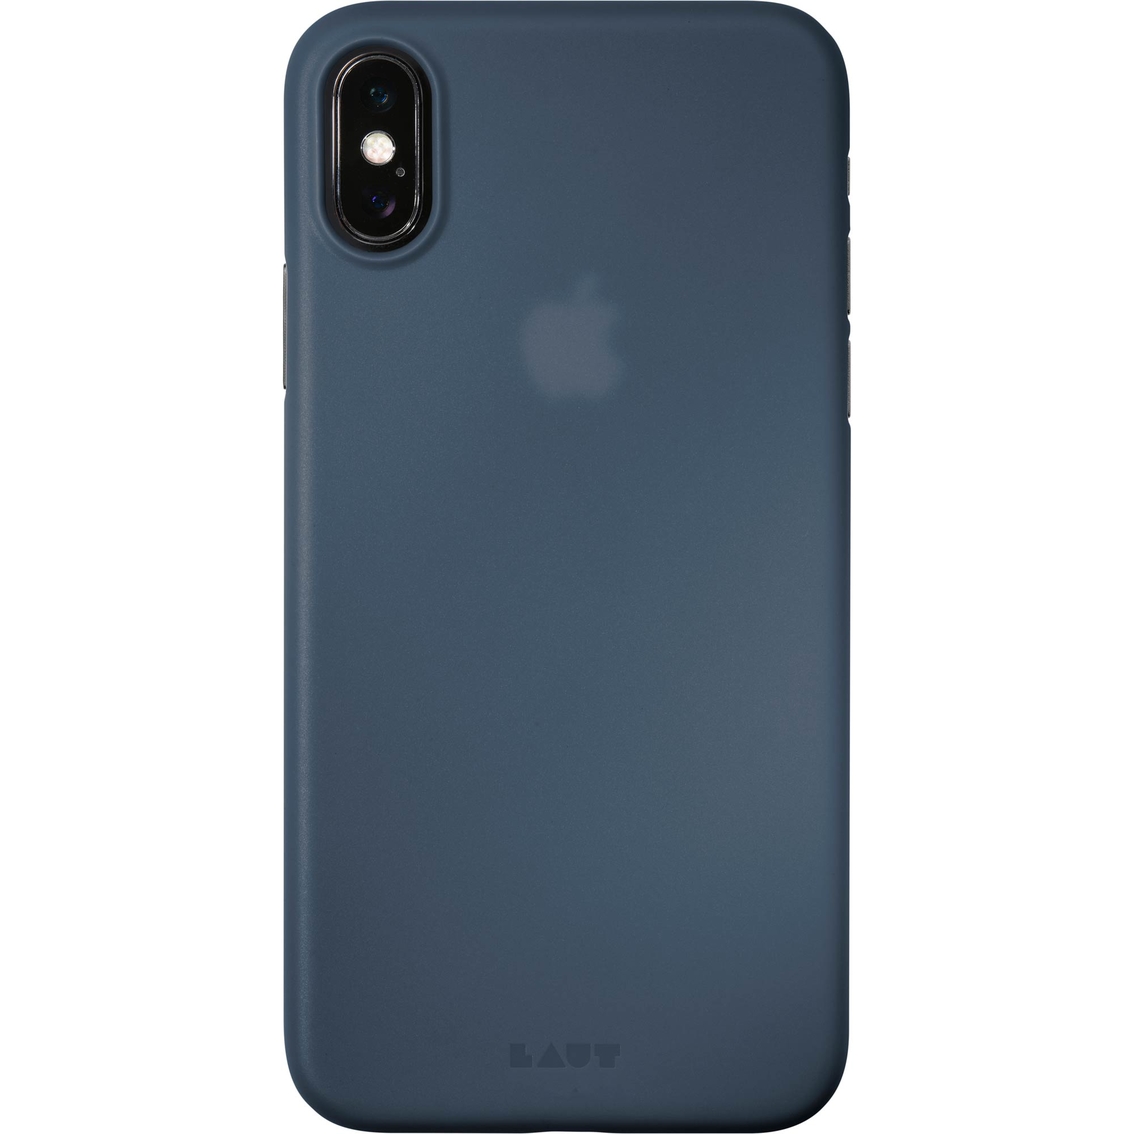 Laut Slimskin Case for iPhone XS/X - Image 3 of 3